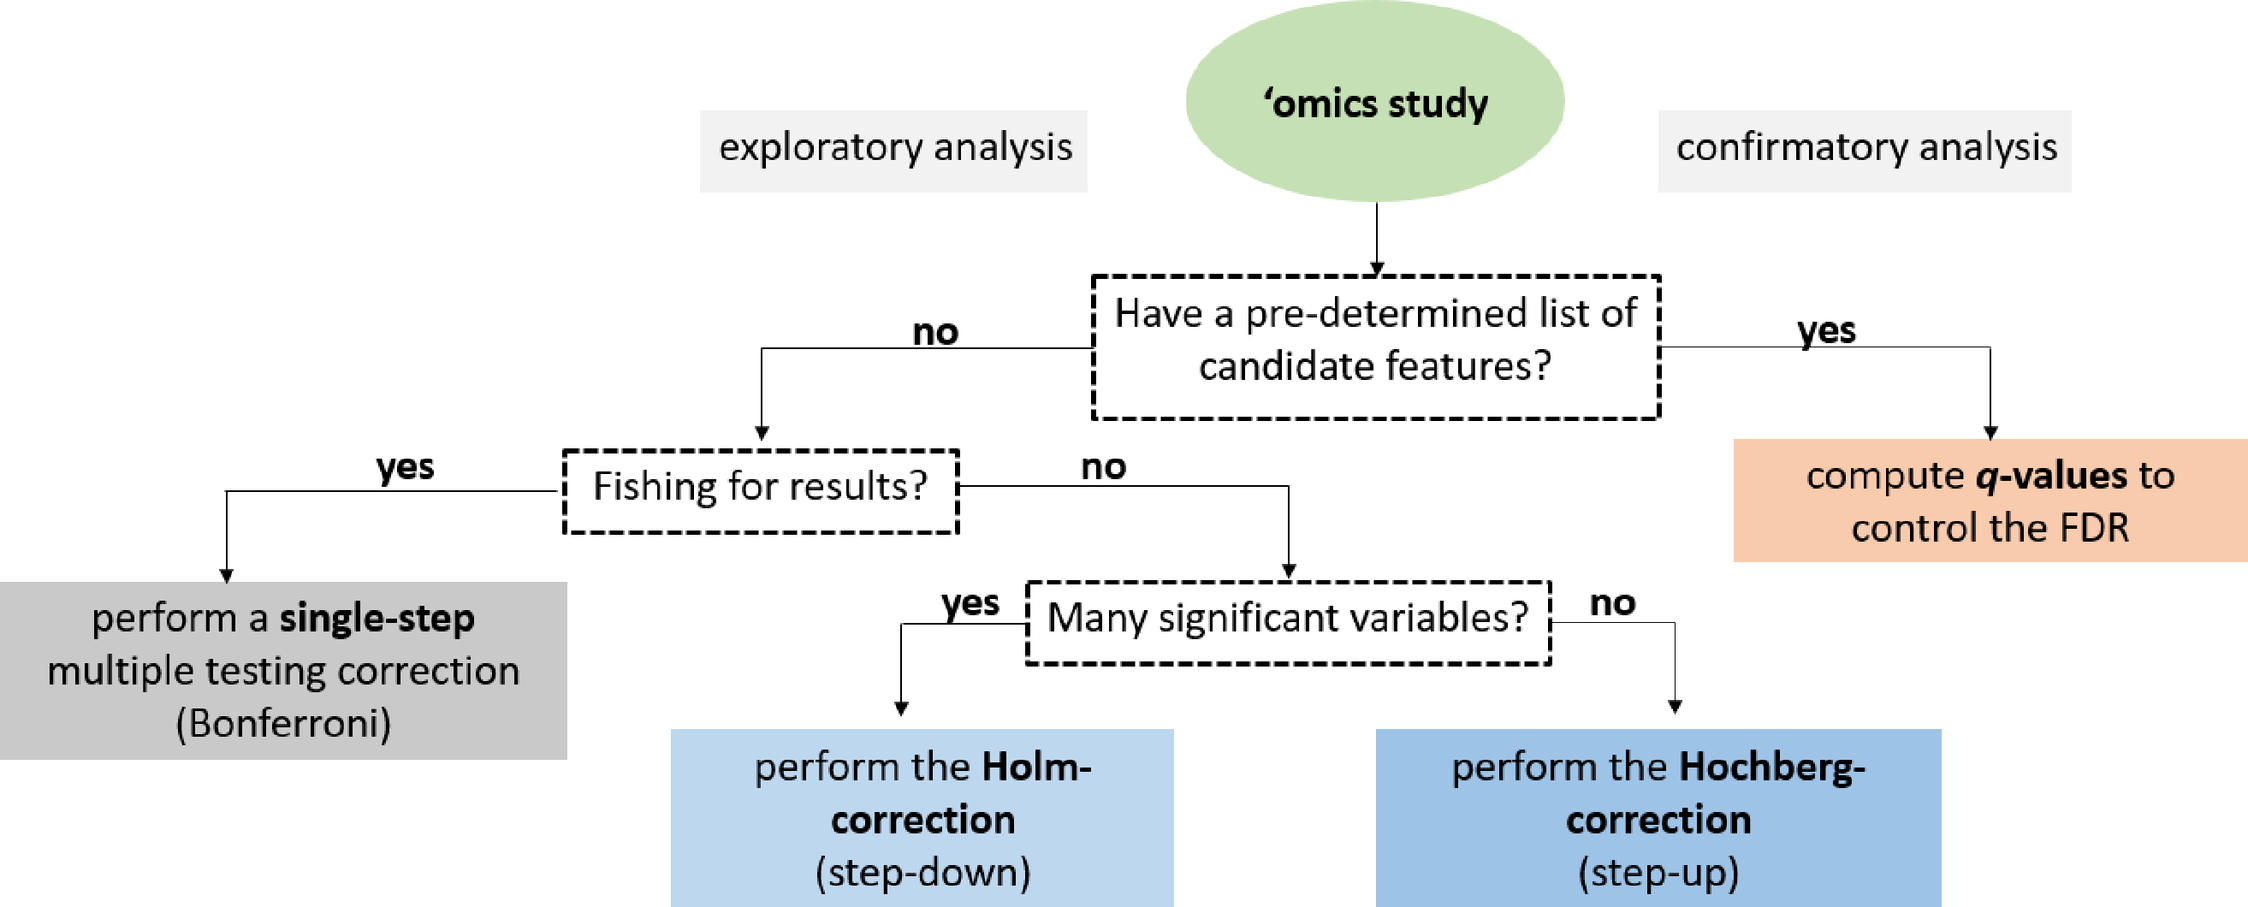 A decision tree to facilitate the selection of suitable methods for multiple testing correction.